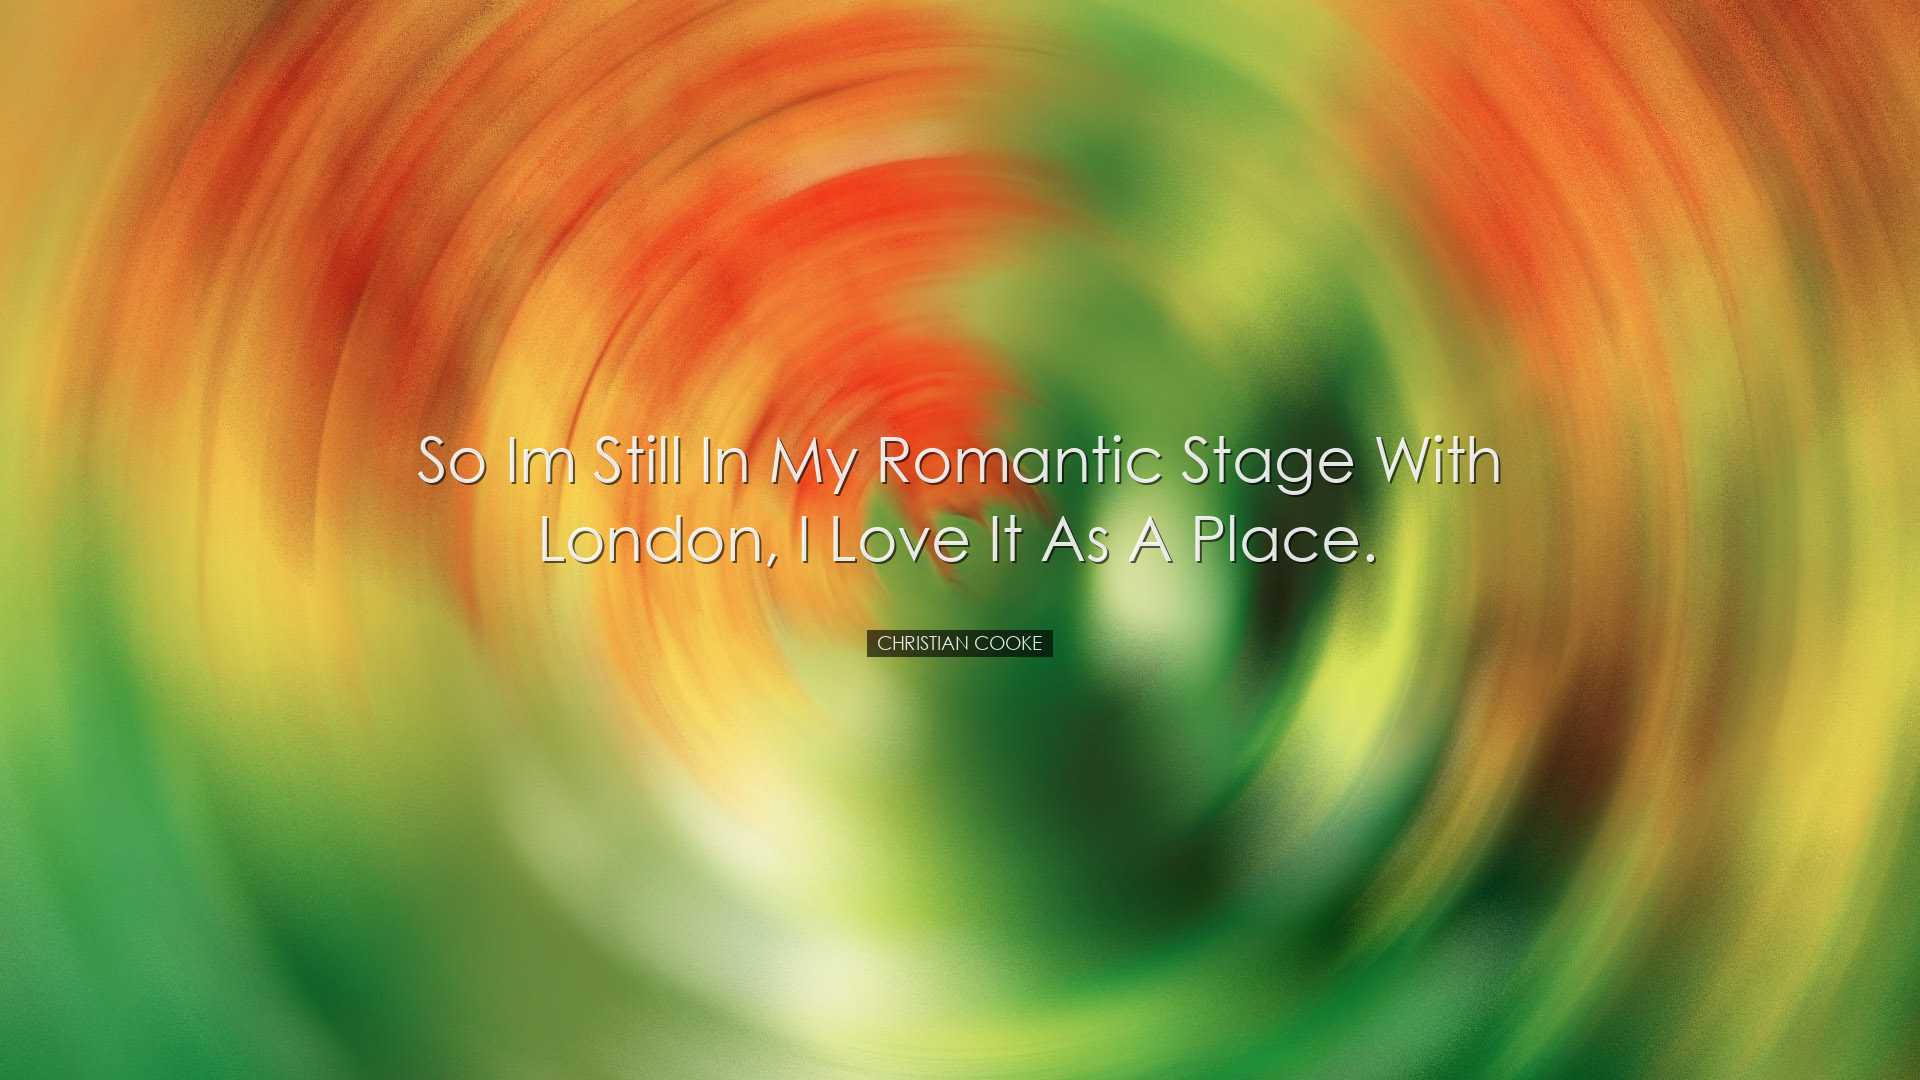 So Im still in my romantic stage with London, I love it as a place